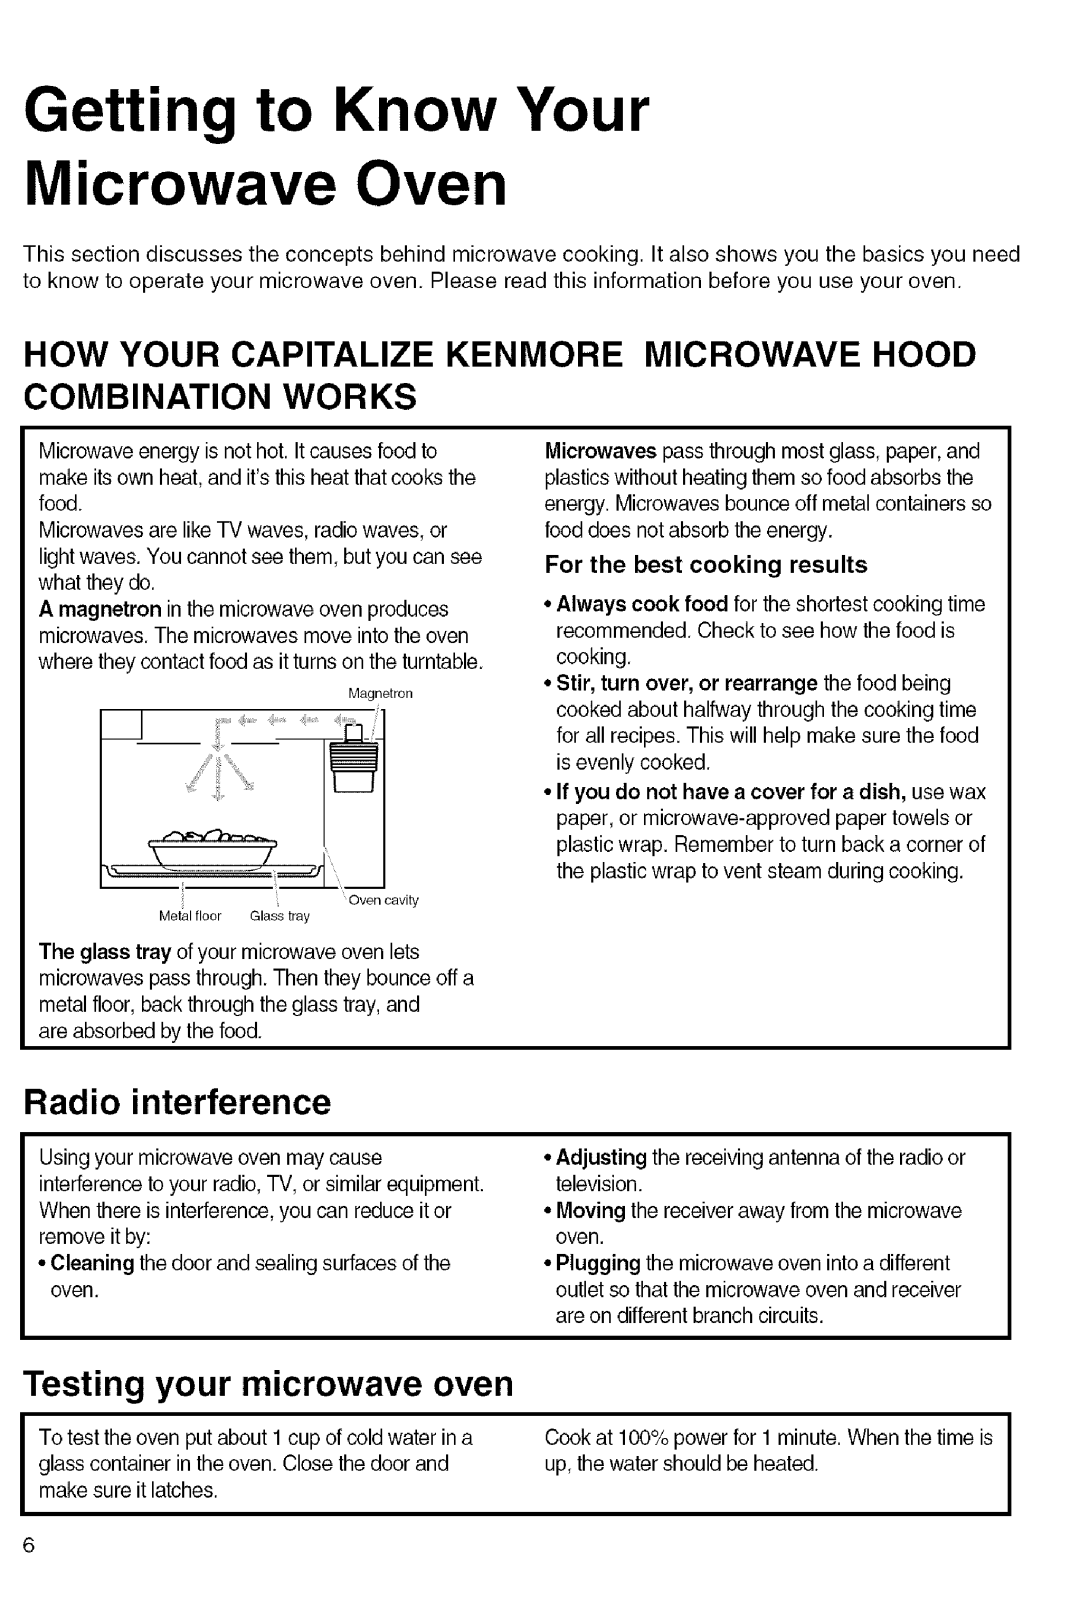 Kenmore 721.80822, 721.80824, 721.80823 Testing your microwave oven, Radio interference, Gettin to Know Your Microwave Oven 